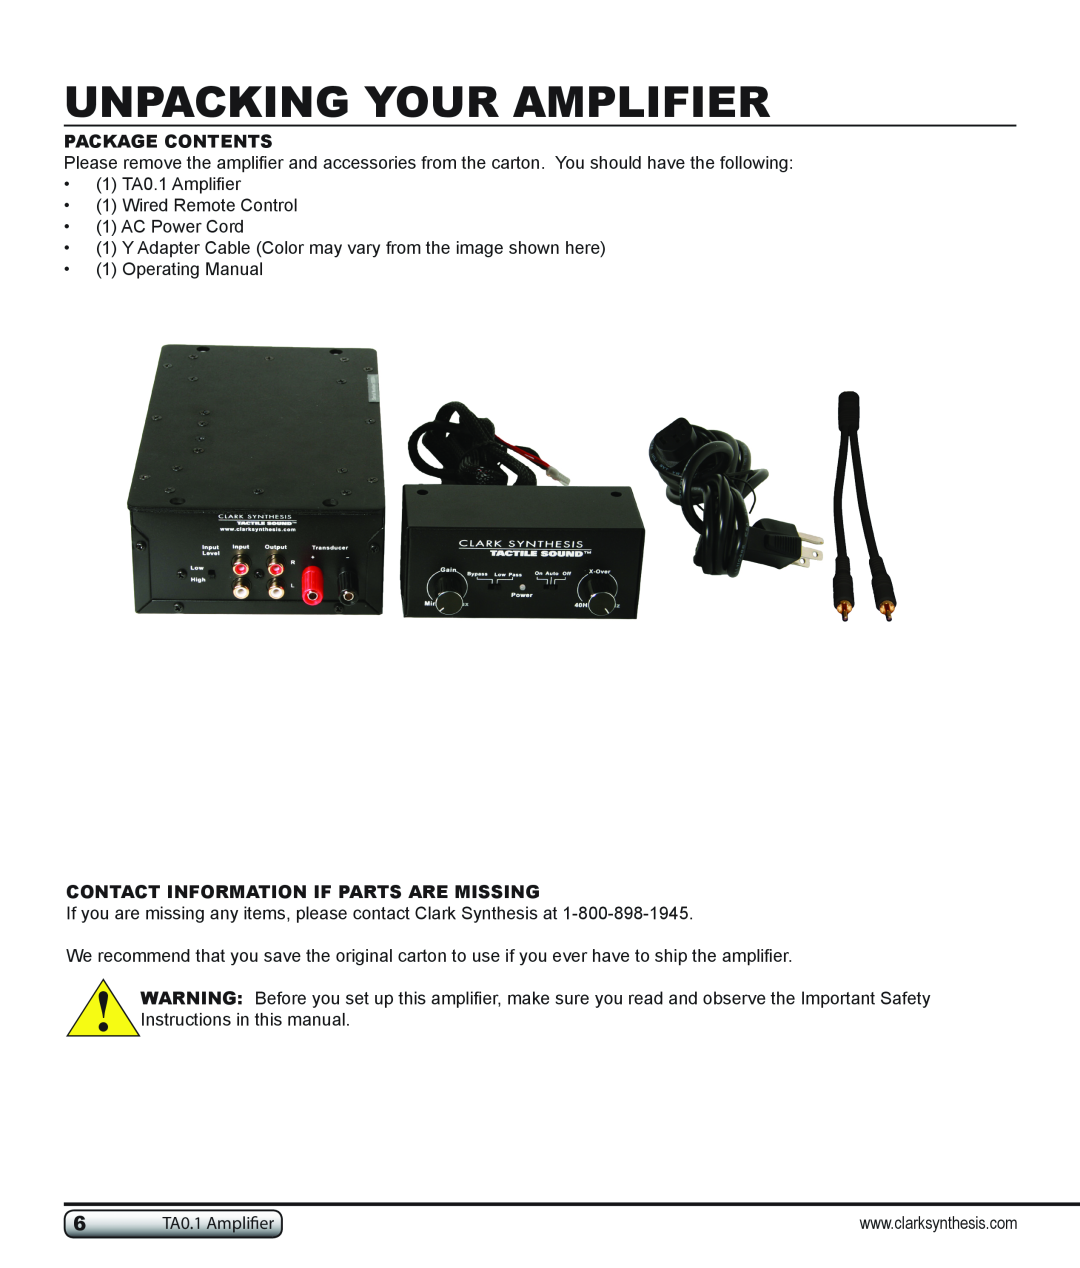 Clark Synthesis TA0.1 owner manual Unpacking Your Amplifier, Package Contents, Contact Information If Parts Are Missing 